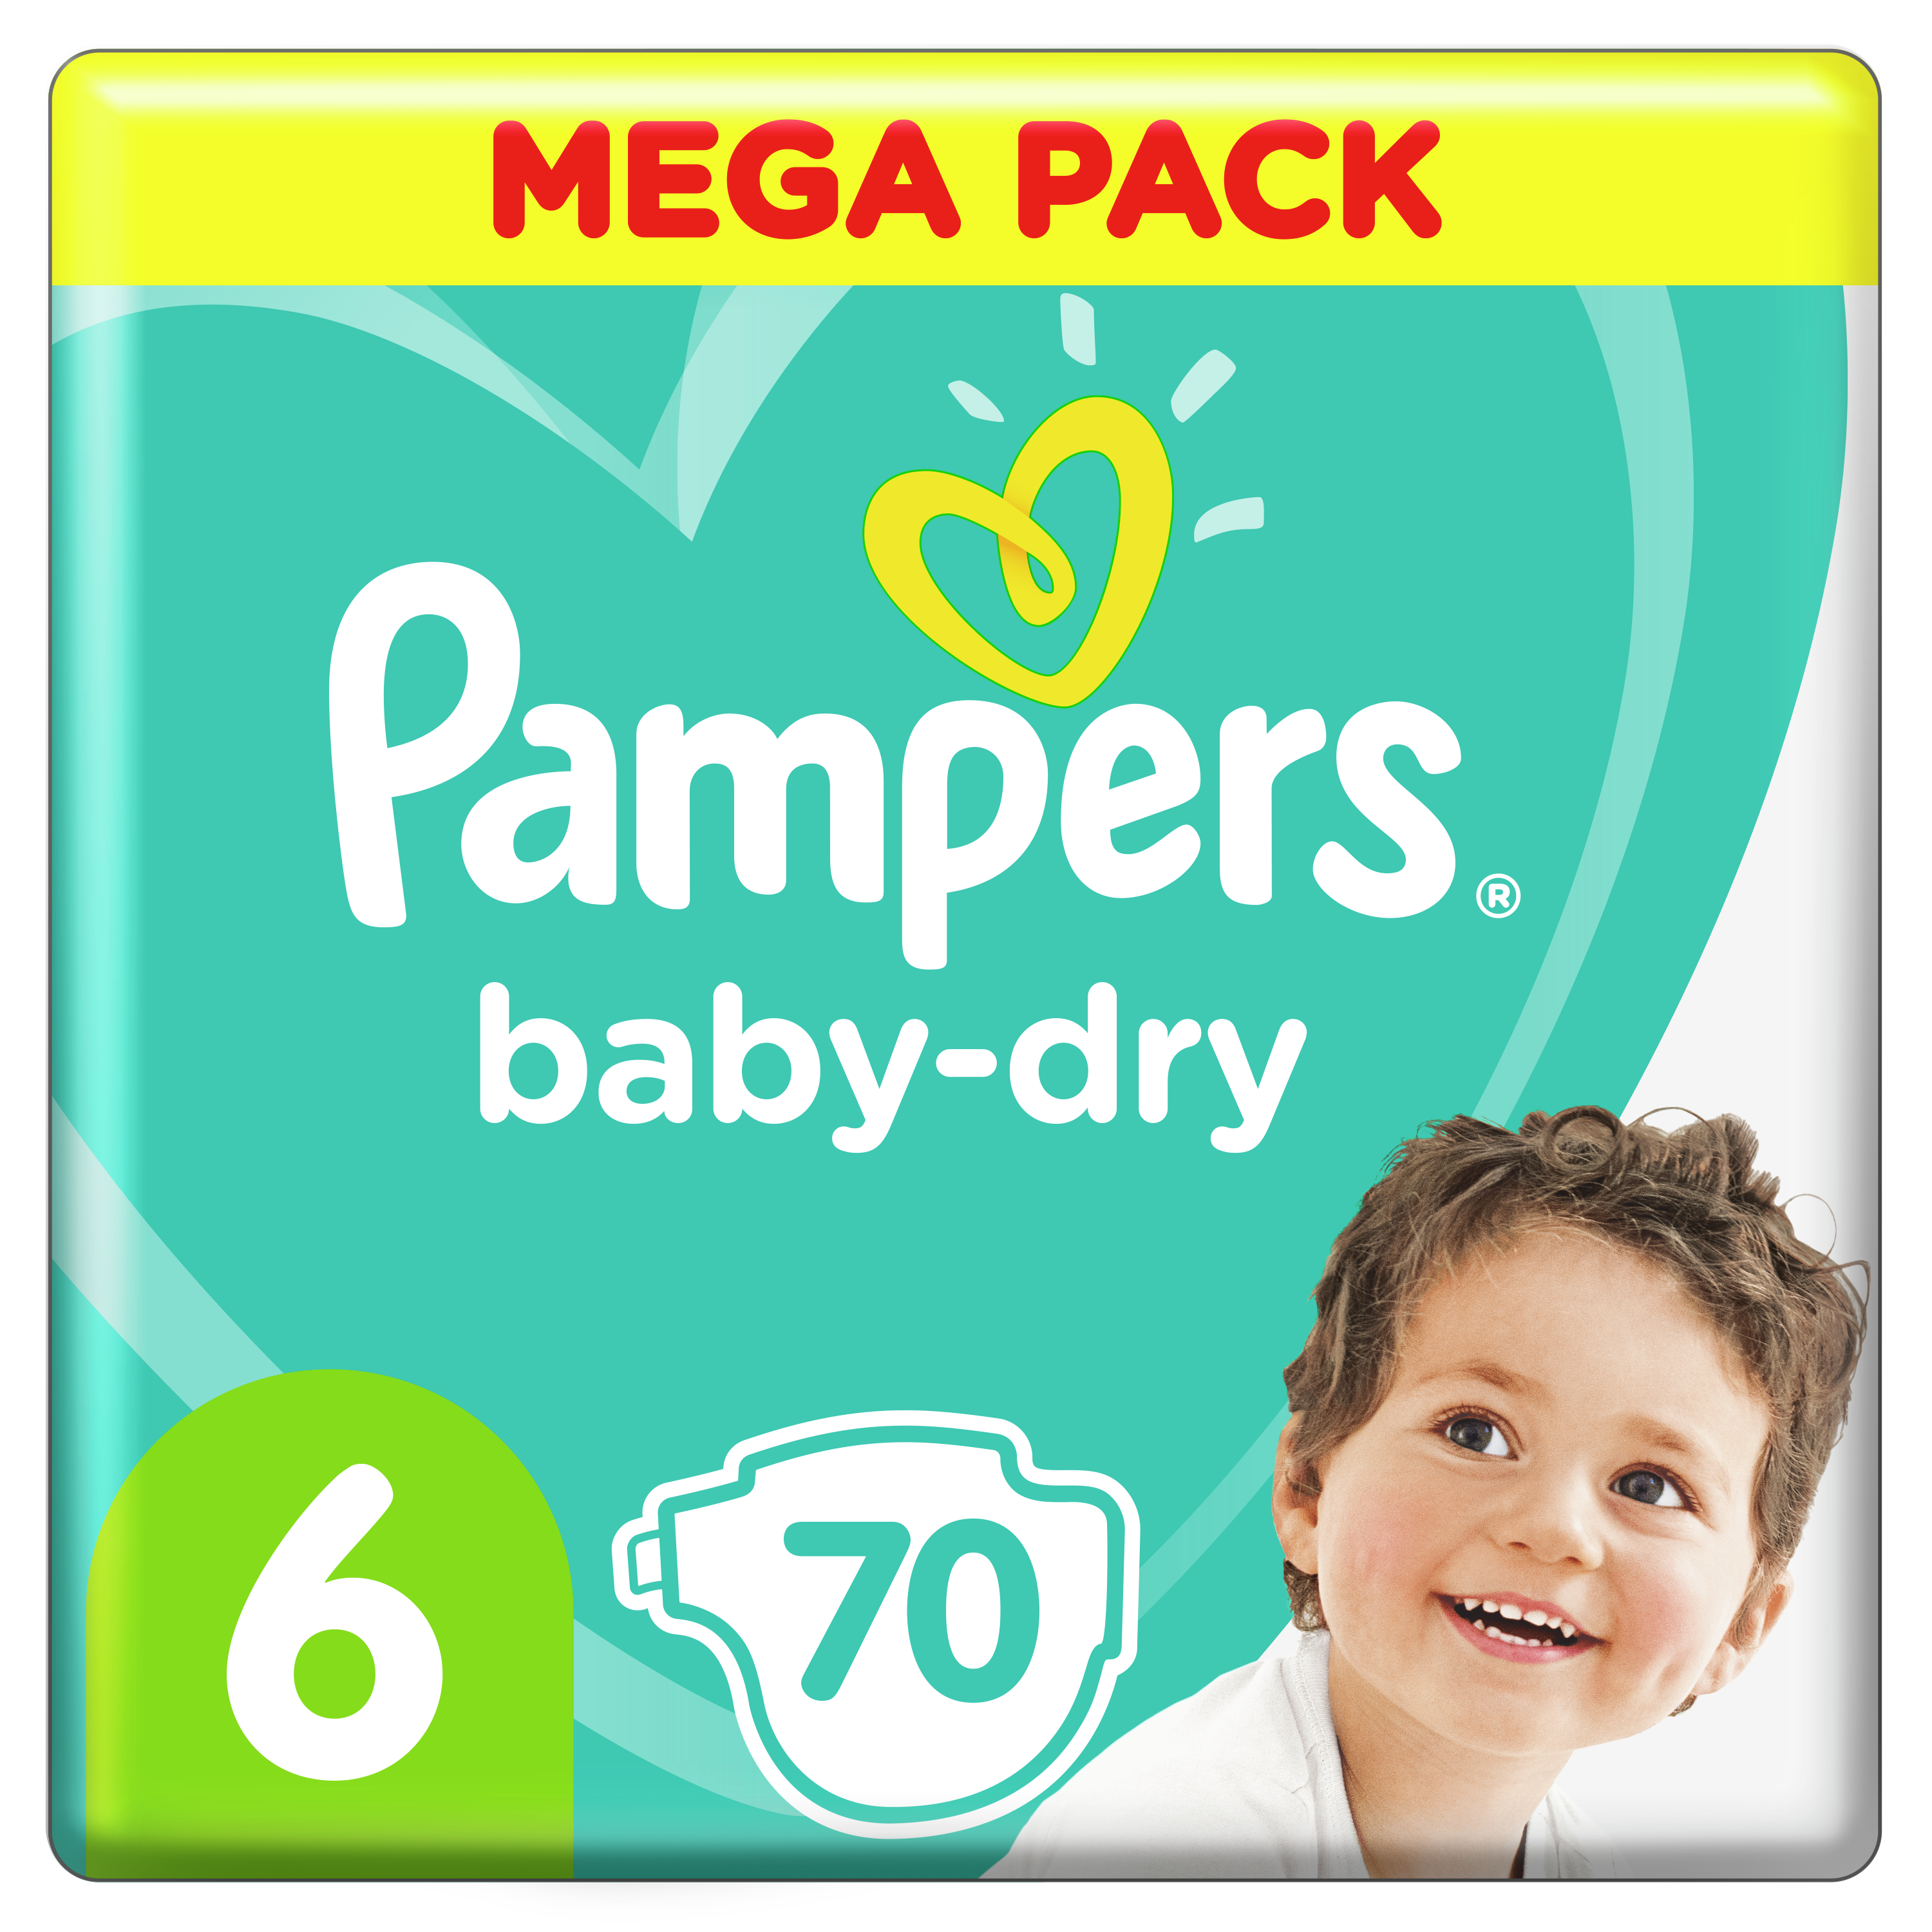 Couches Baby Dry, taille 6, format jumbo, 21 unités – Pampers